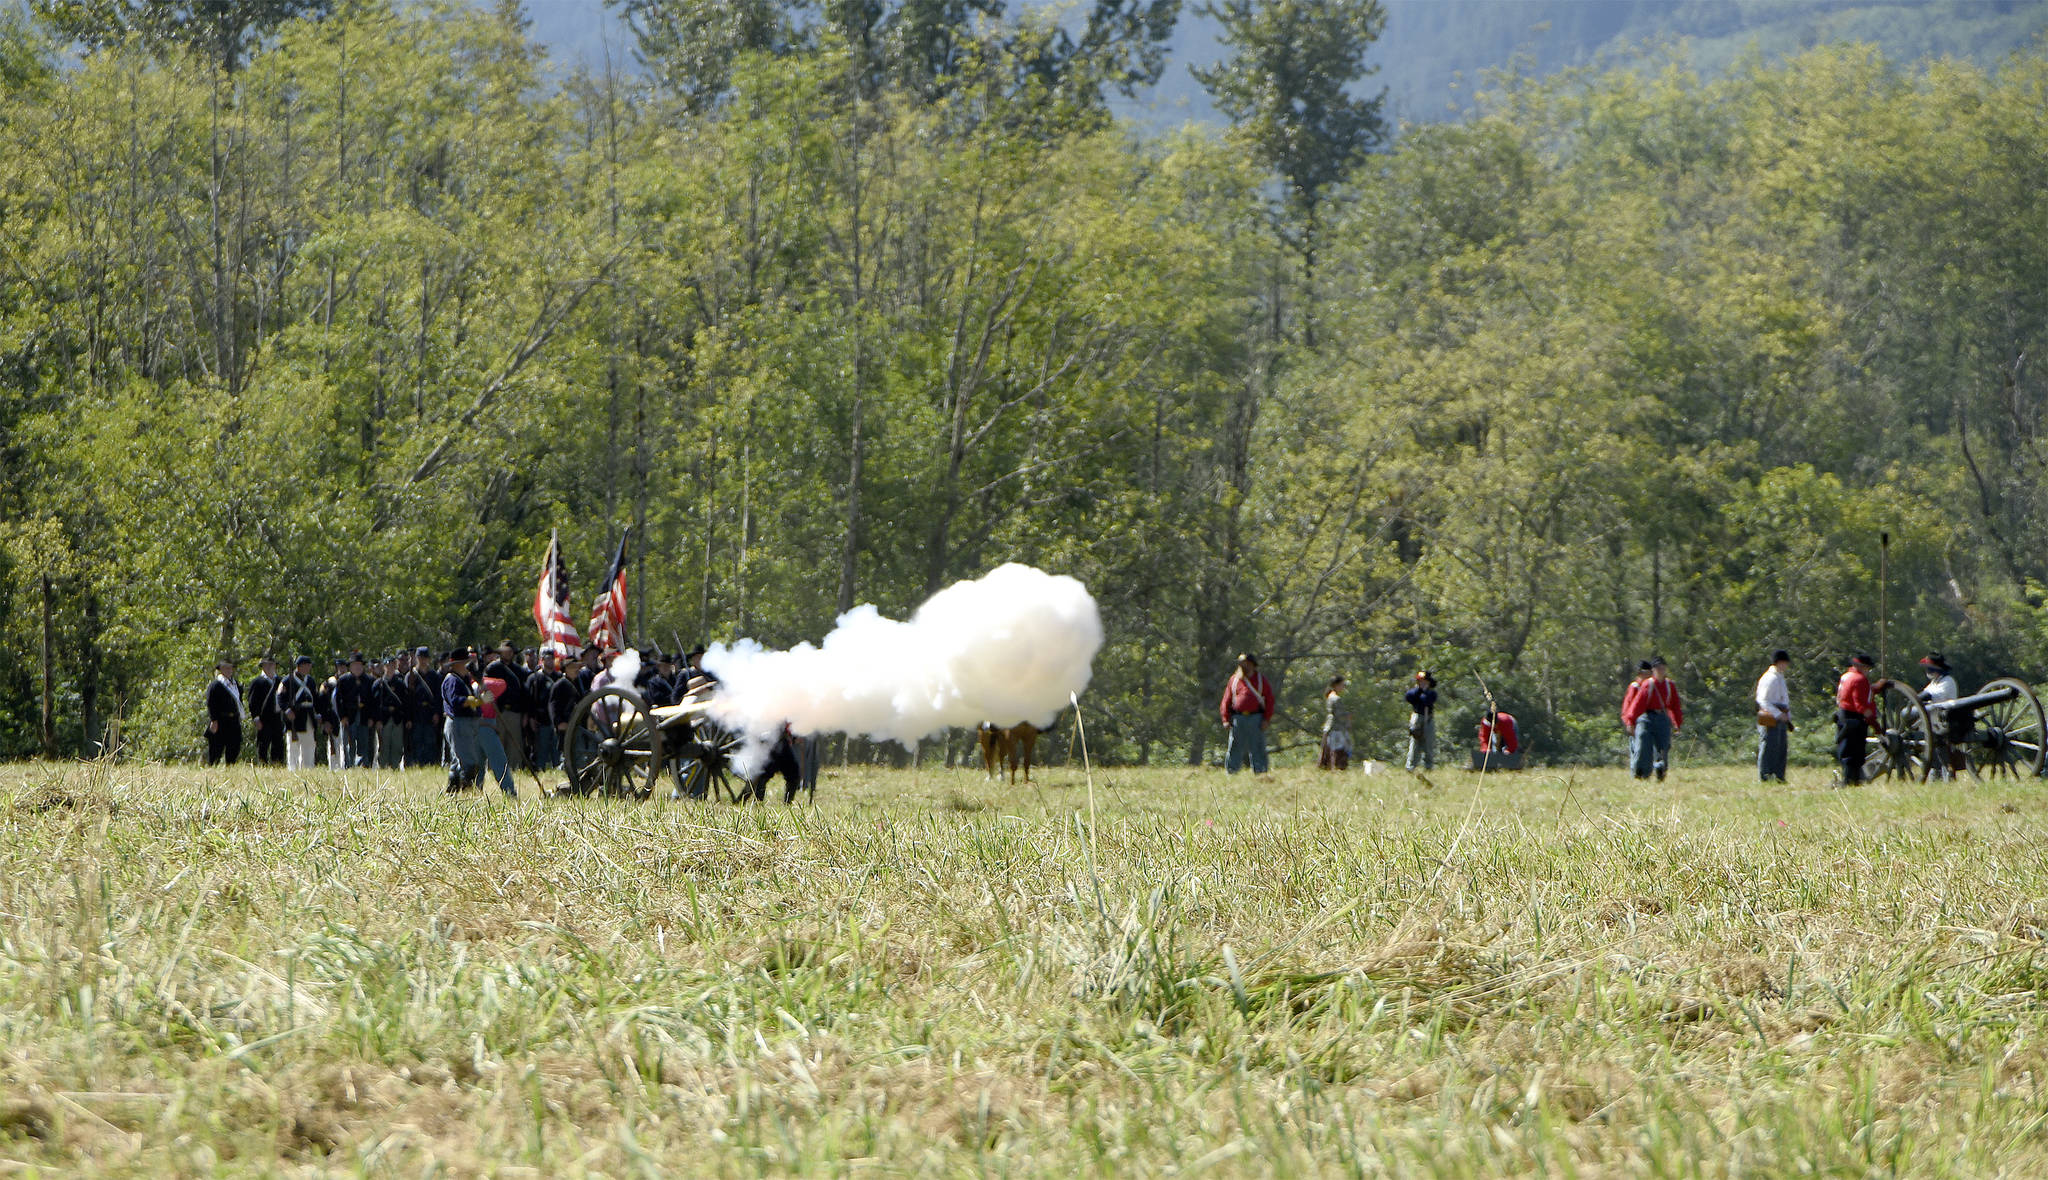 A Union artillery cannon fires at the enemy at the start of a 2016 Civil War battle re-enactment at Meadowbrook Farm.